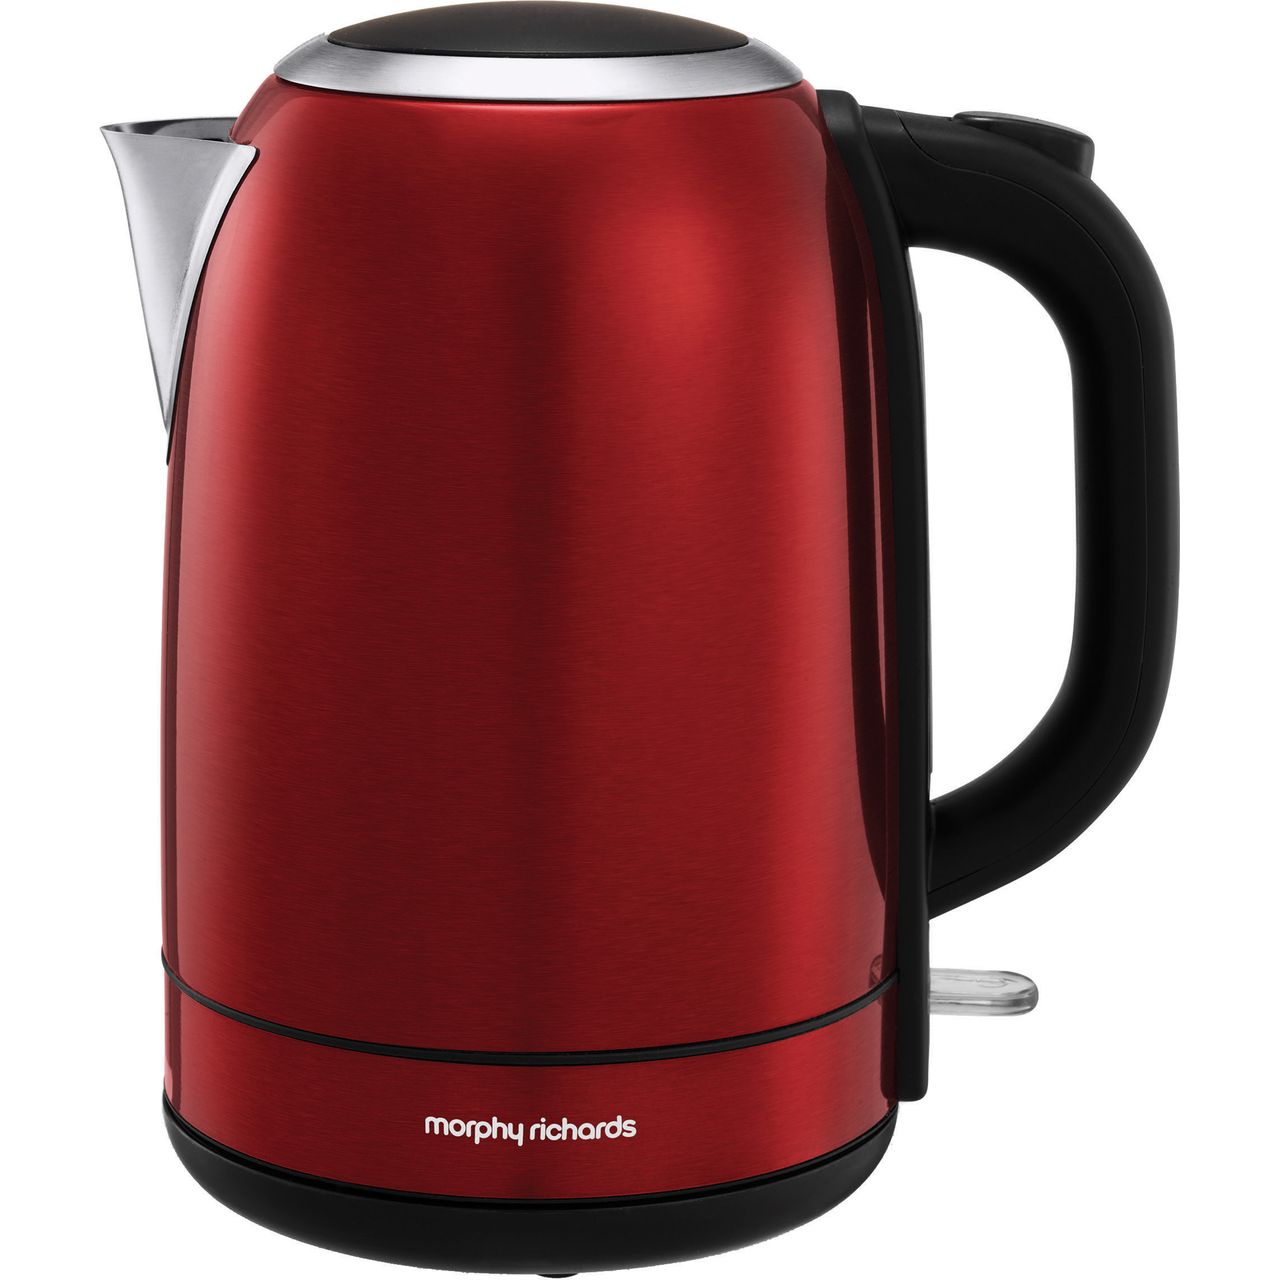 Morphy Richards Equip 102782 Kettle Review